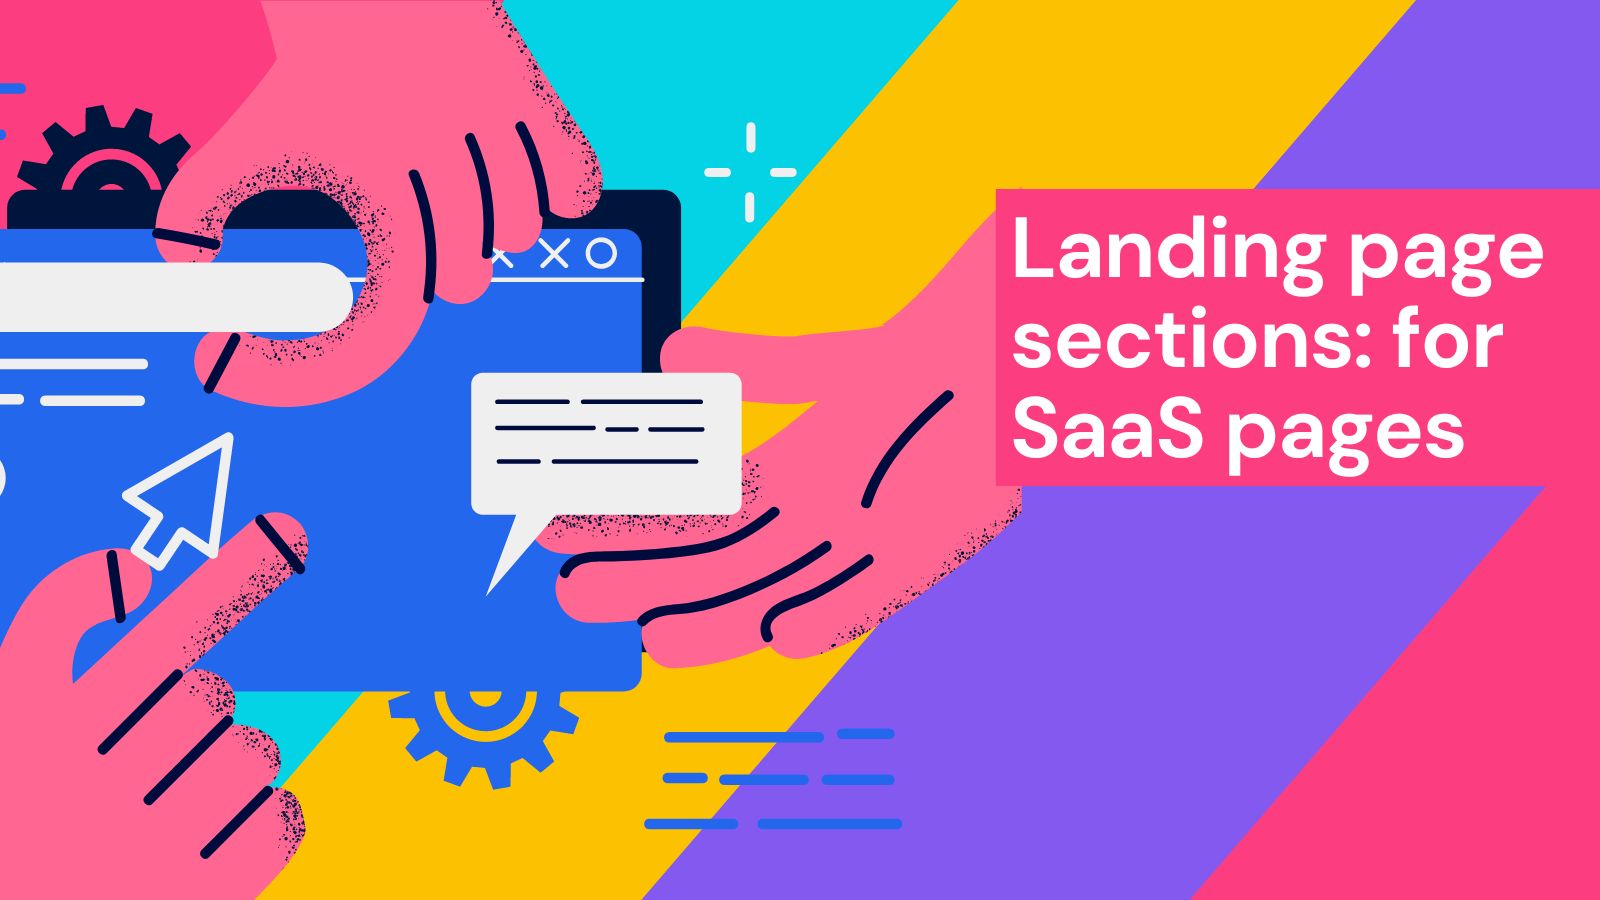 SaaS landing page sections